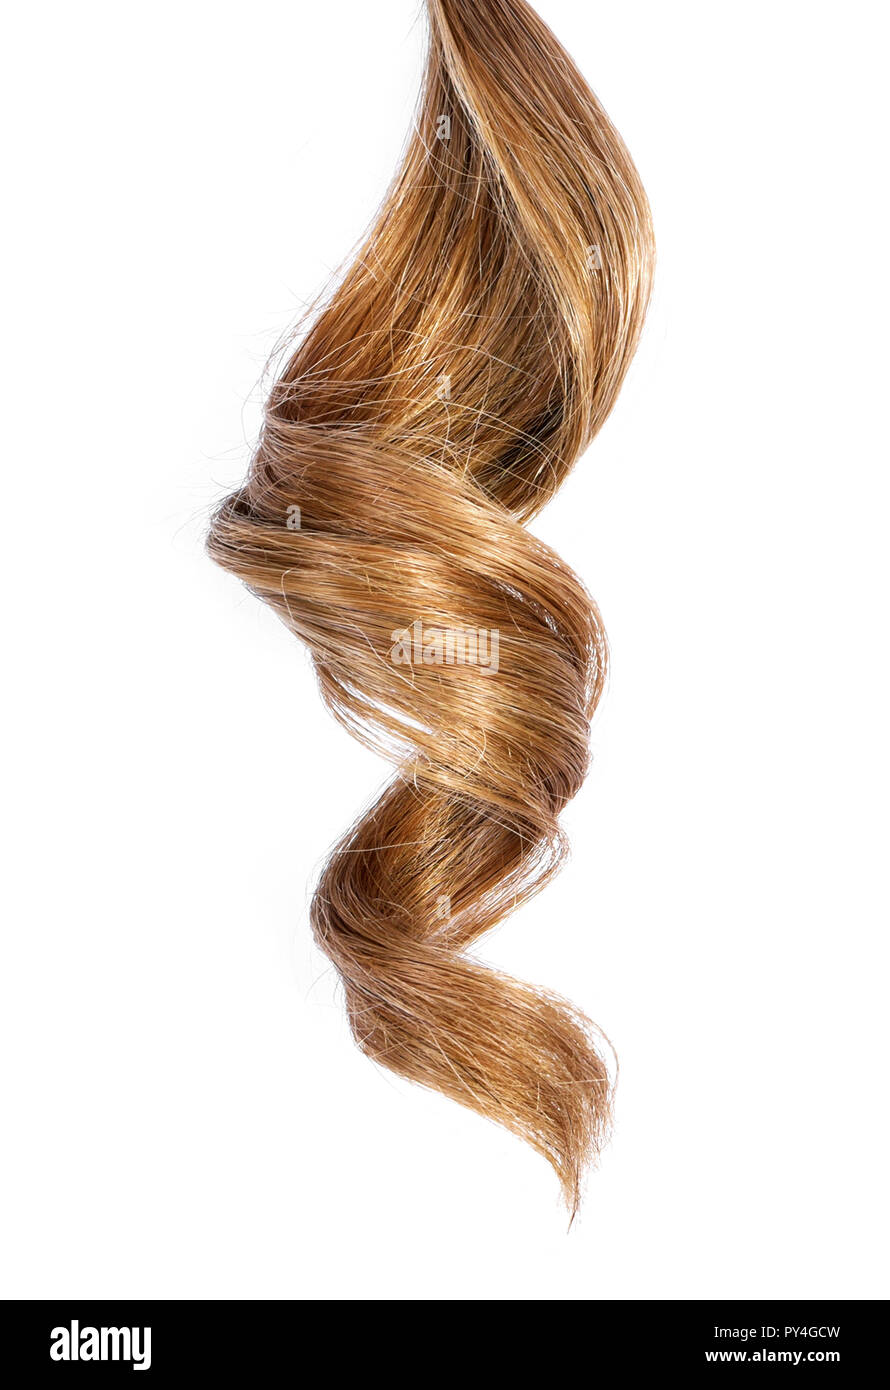 Beautiful brunette hair, isolated on white background. Long brown hair tail, curly and healthy hair, design element or hair cut theme. Stock Photo